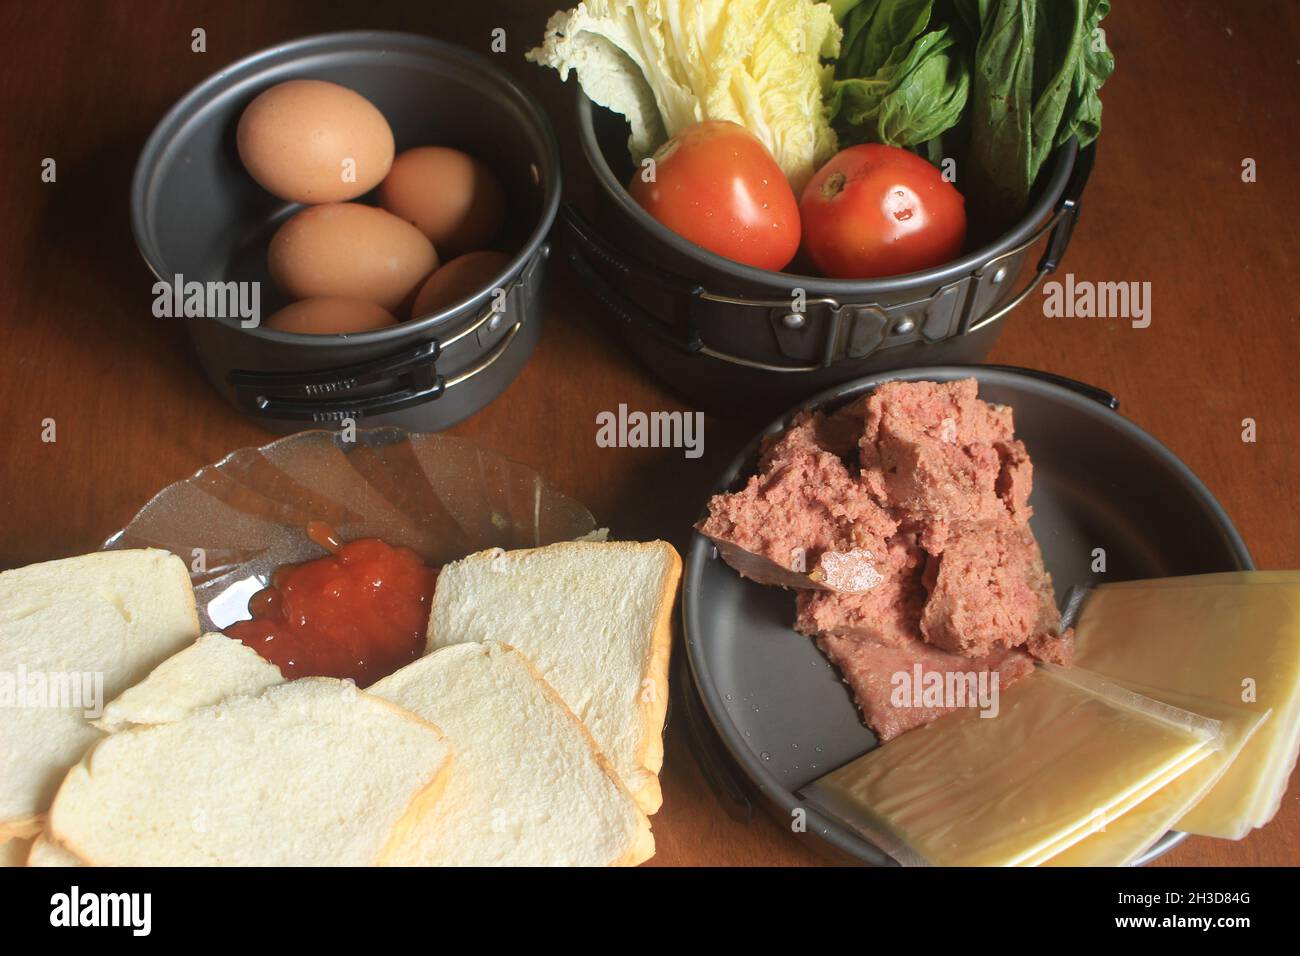 a healthy diet consisting of minced beef, sliced fragrant white bread, sauce, fresh chicken eggs, cheese, mustard greens, and tomatoes. Stock Photo